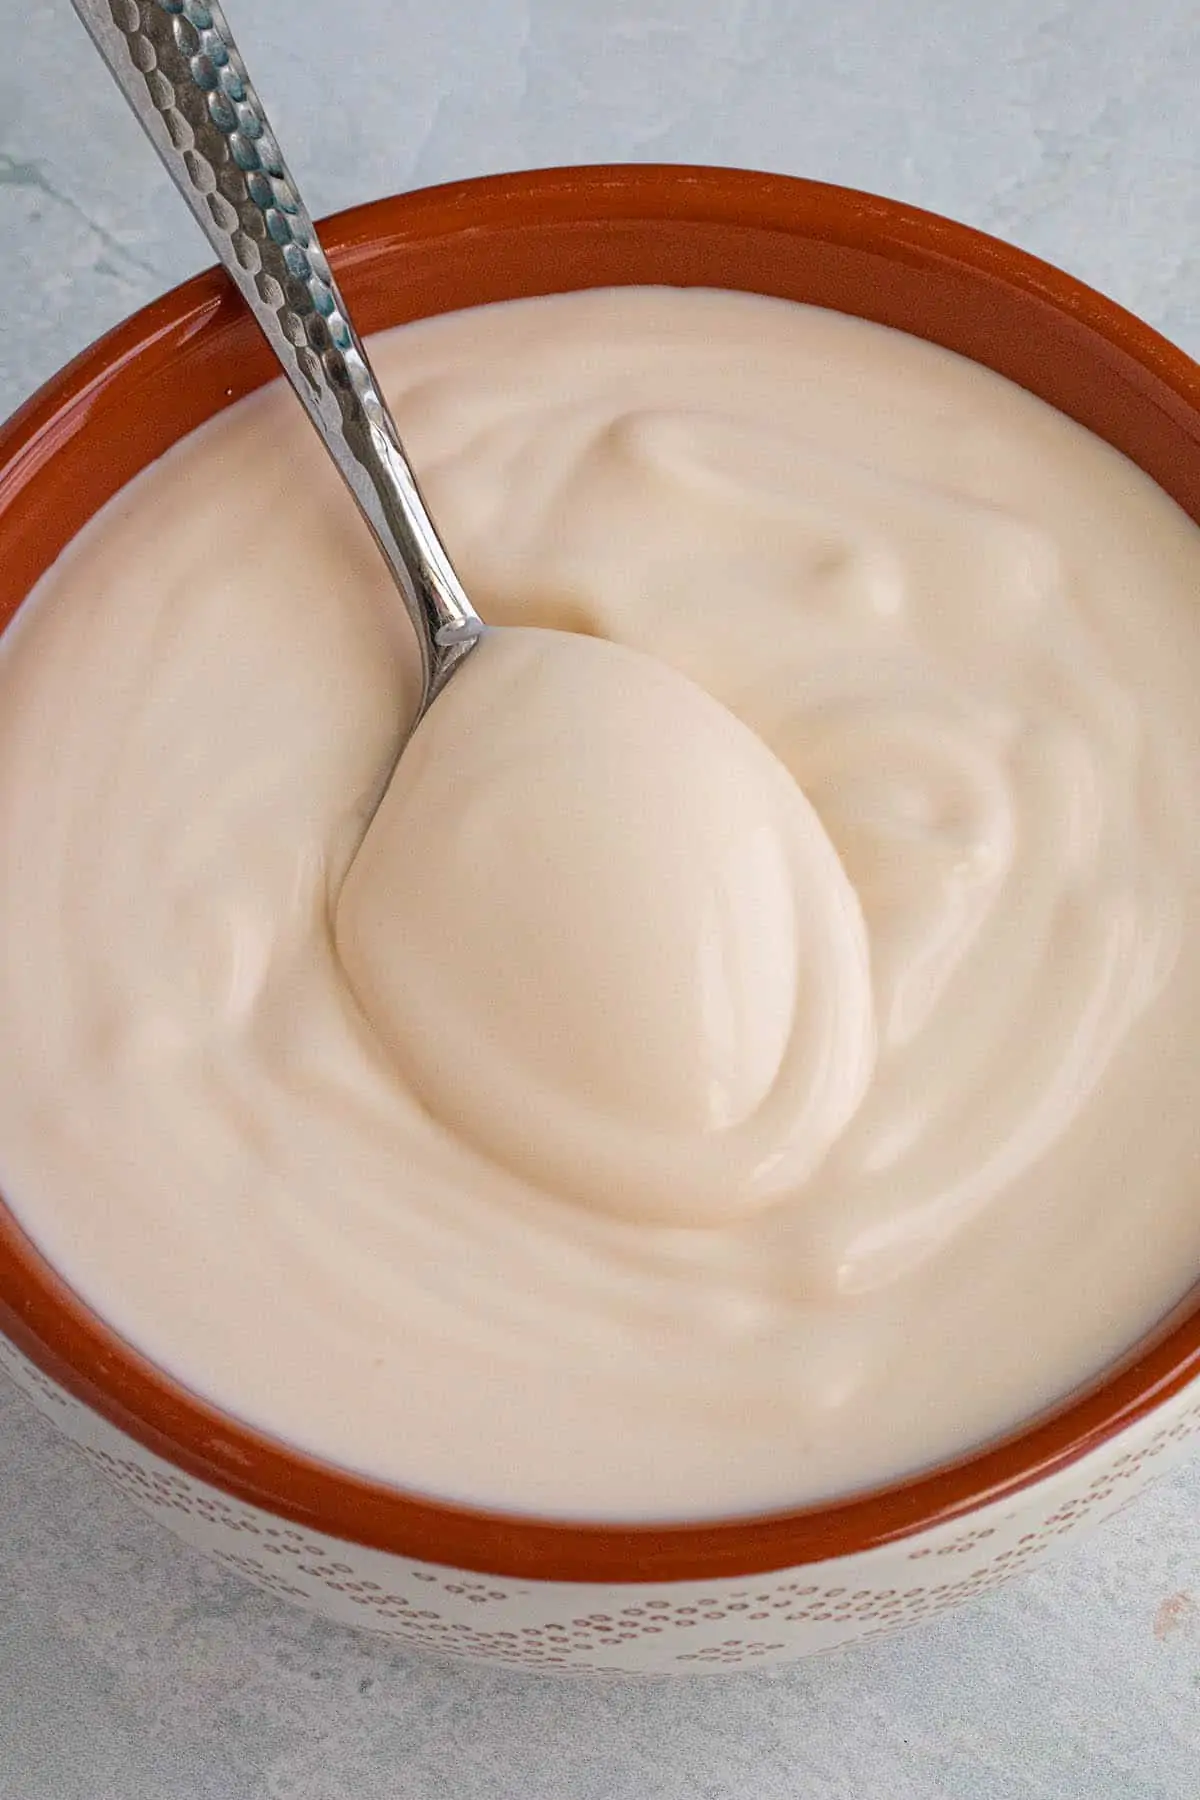 Mexican Crema in a bowl.